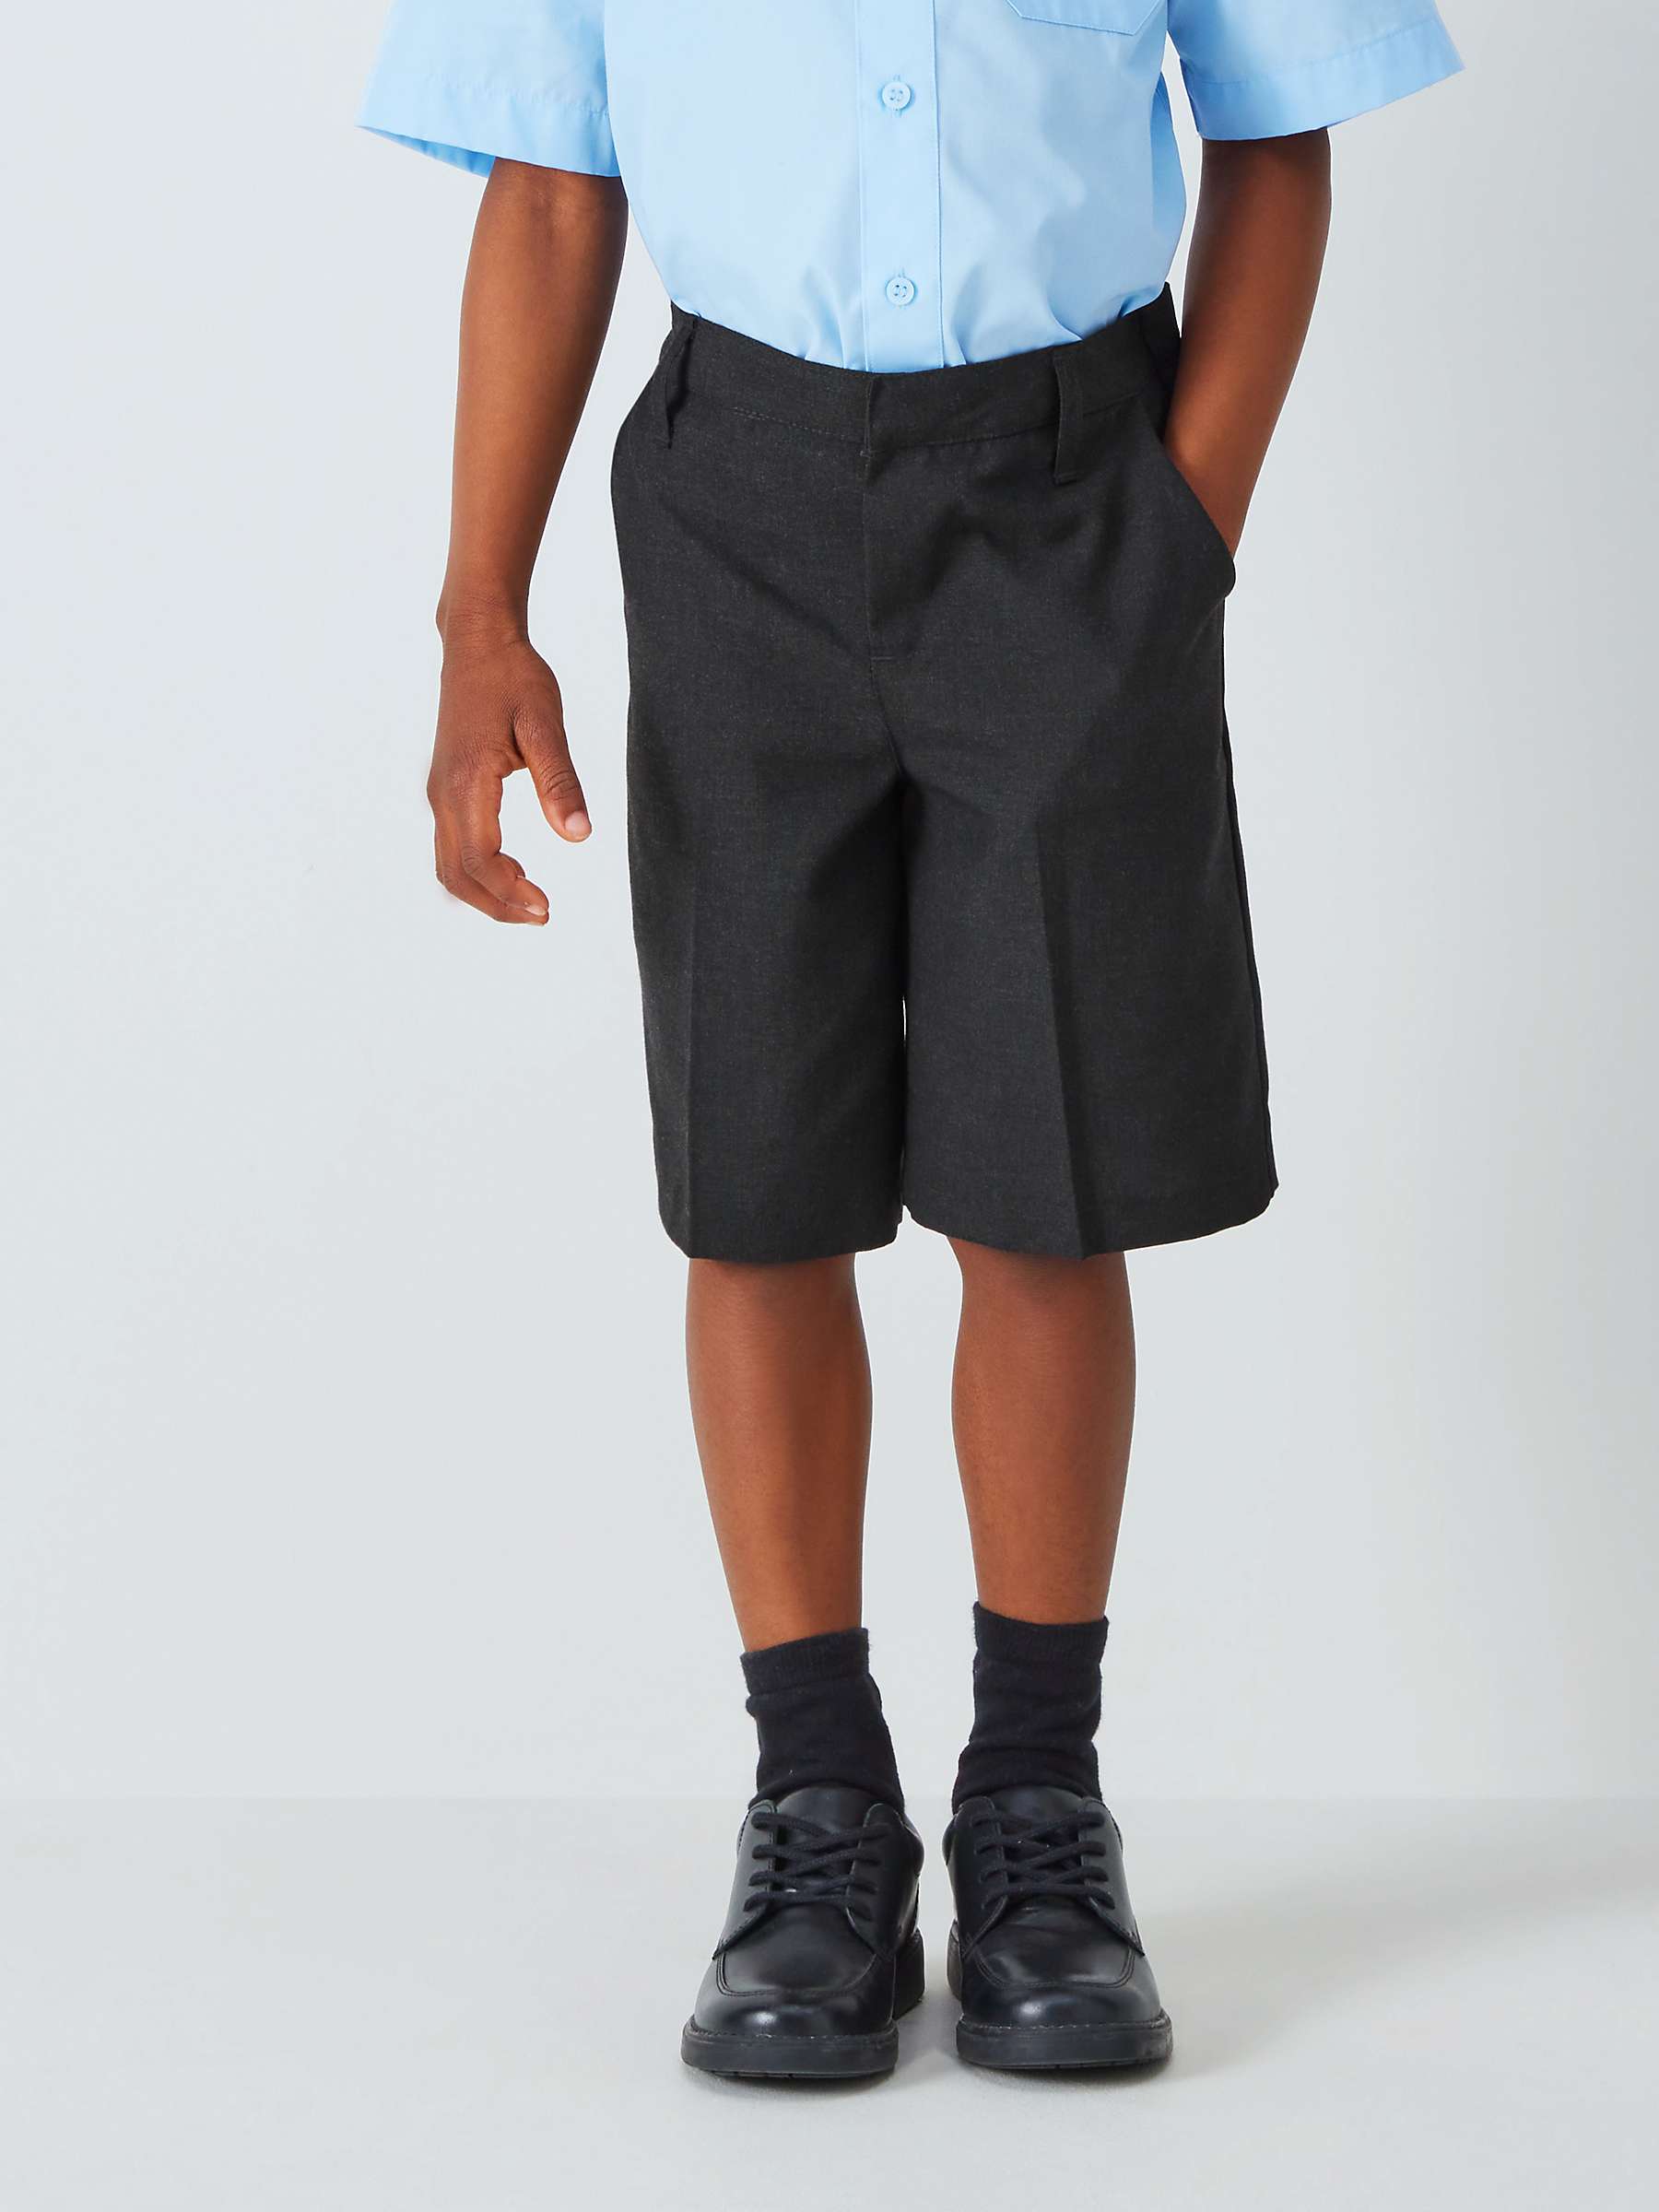 Buy John Lewis ANYDAY Kids' Adjustable Waist Stain Resistant School Shorts, Pack of 2, Grey Charcoal Online at johnlewis.com